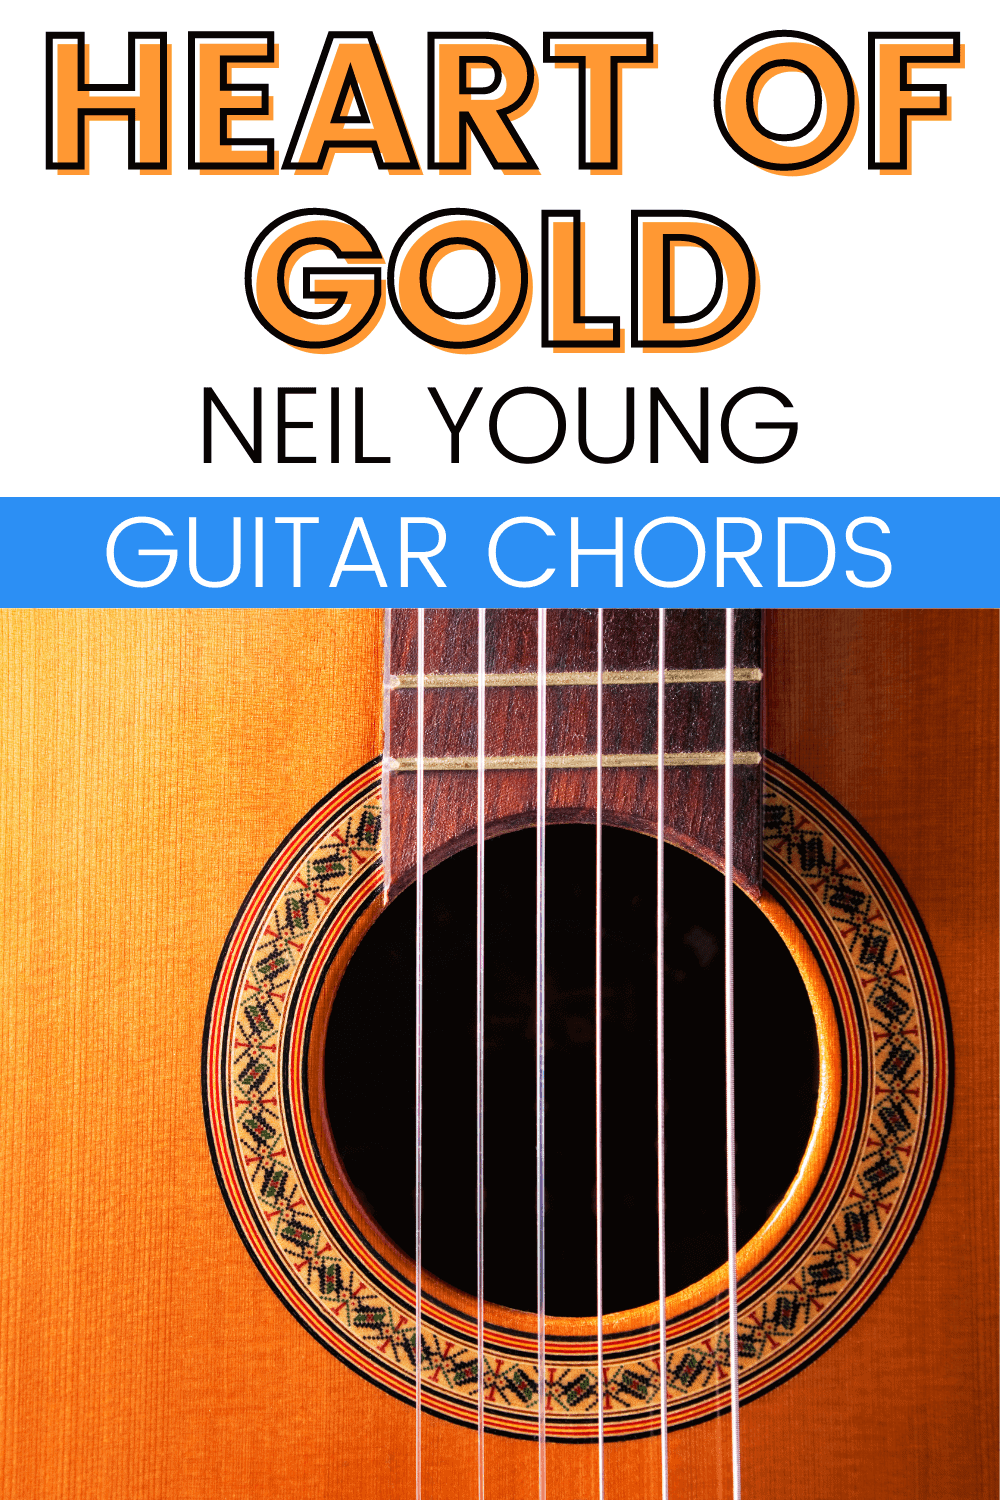 HEART OF GOLD NEIL YOUNG GUITAR CHORDS